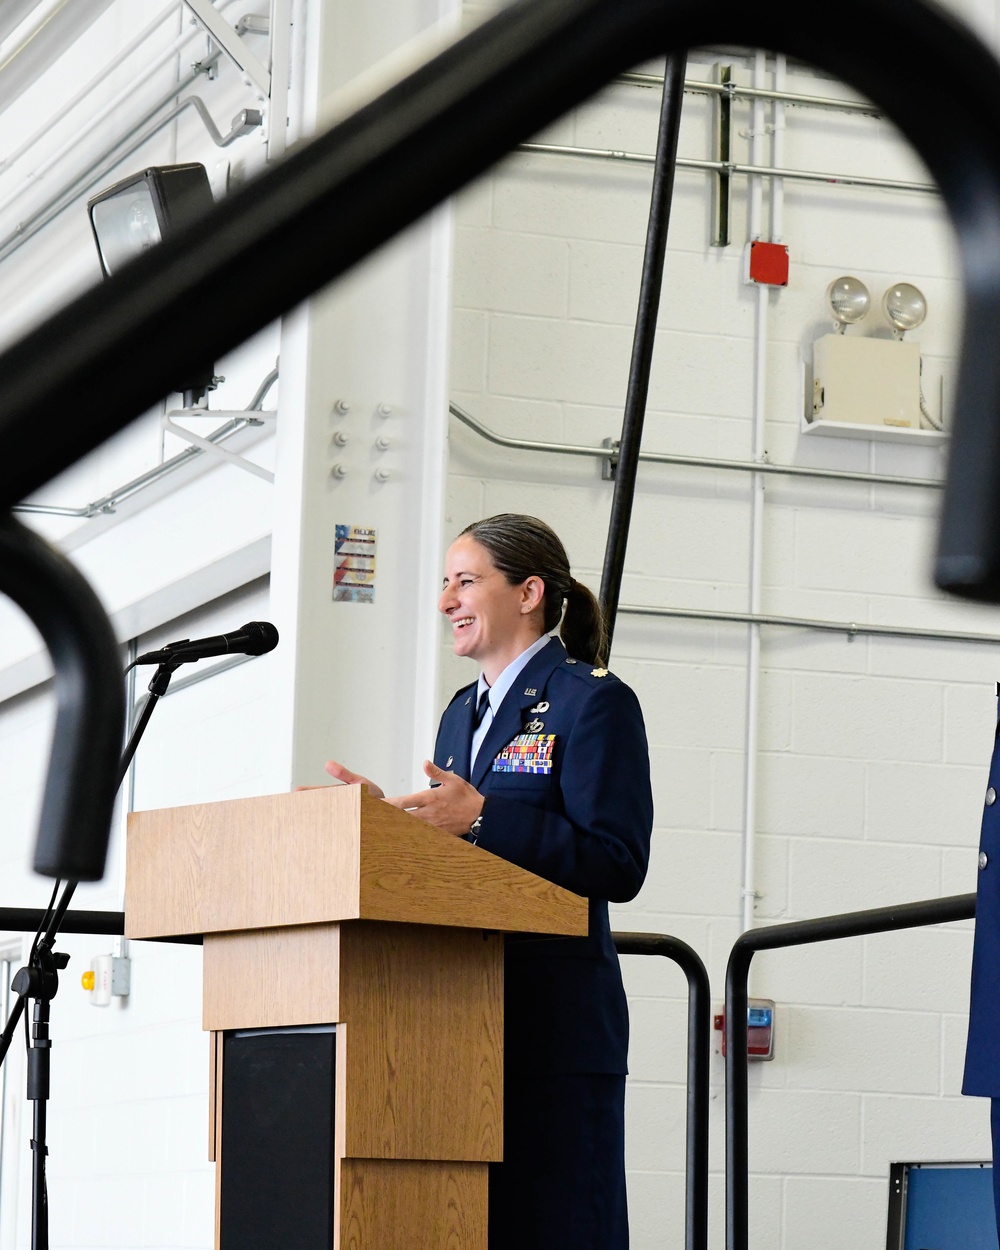 VanDenBroeke assumes command of 910th Civil Engineer Squadron